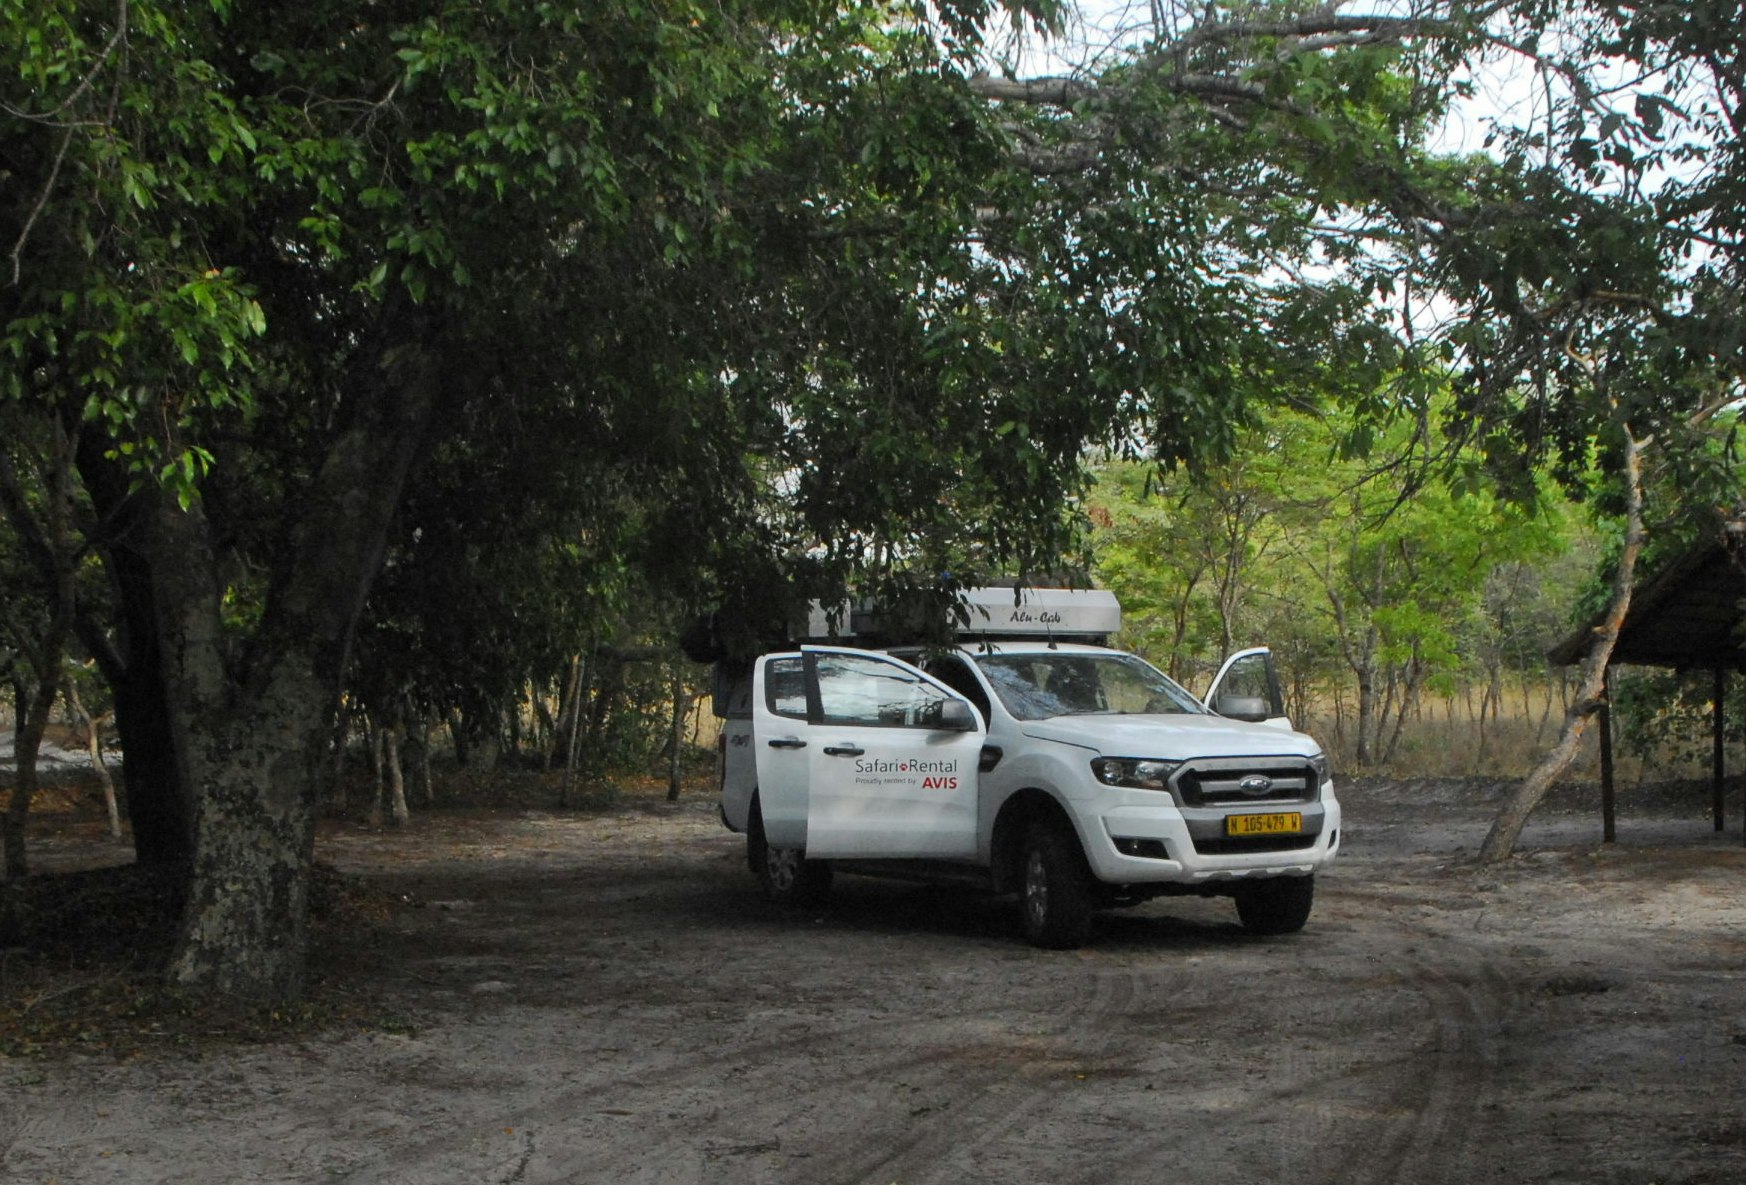 A white Ford truck, with its doors open, sits on a dirt path surrounded by trees and a small thatched structure; two fold-down tents are on the truck's roof.